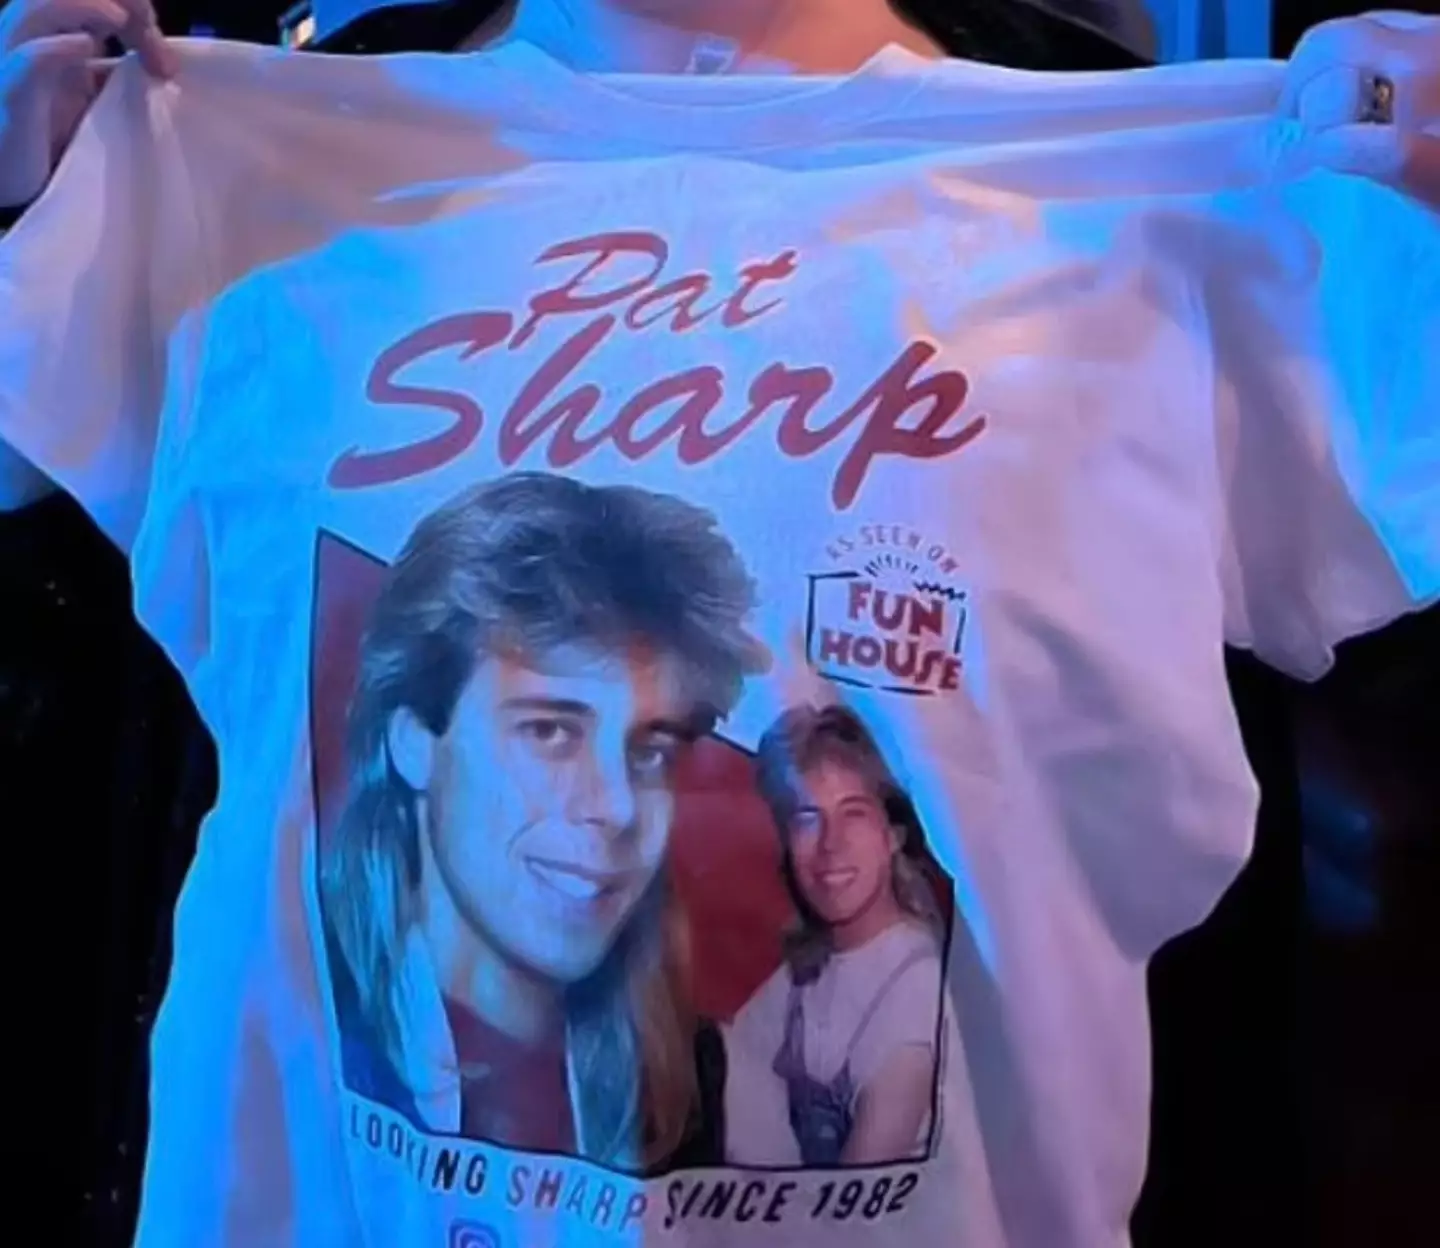 Pat Sharp gifted the woman a t-shirt.